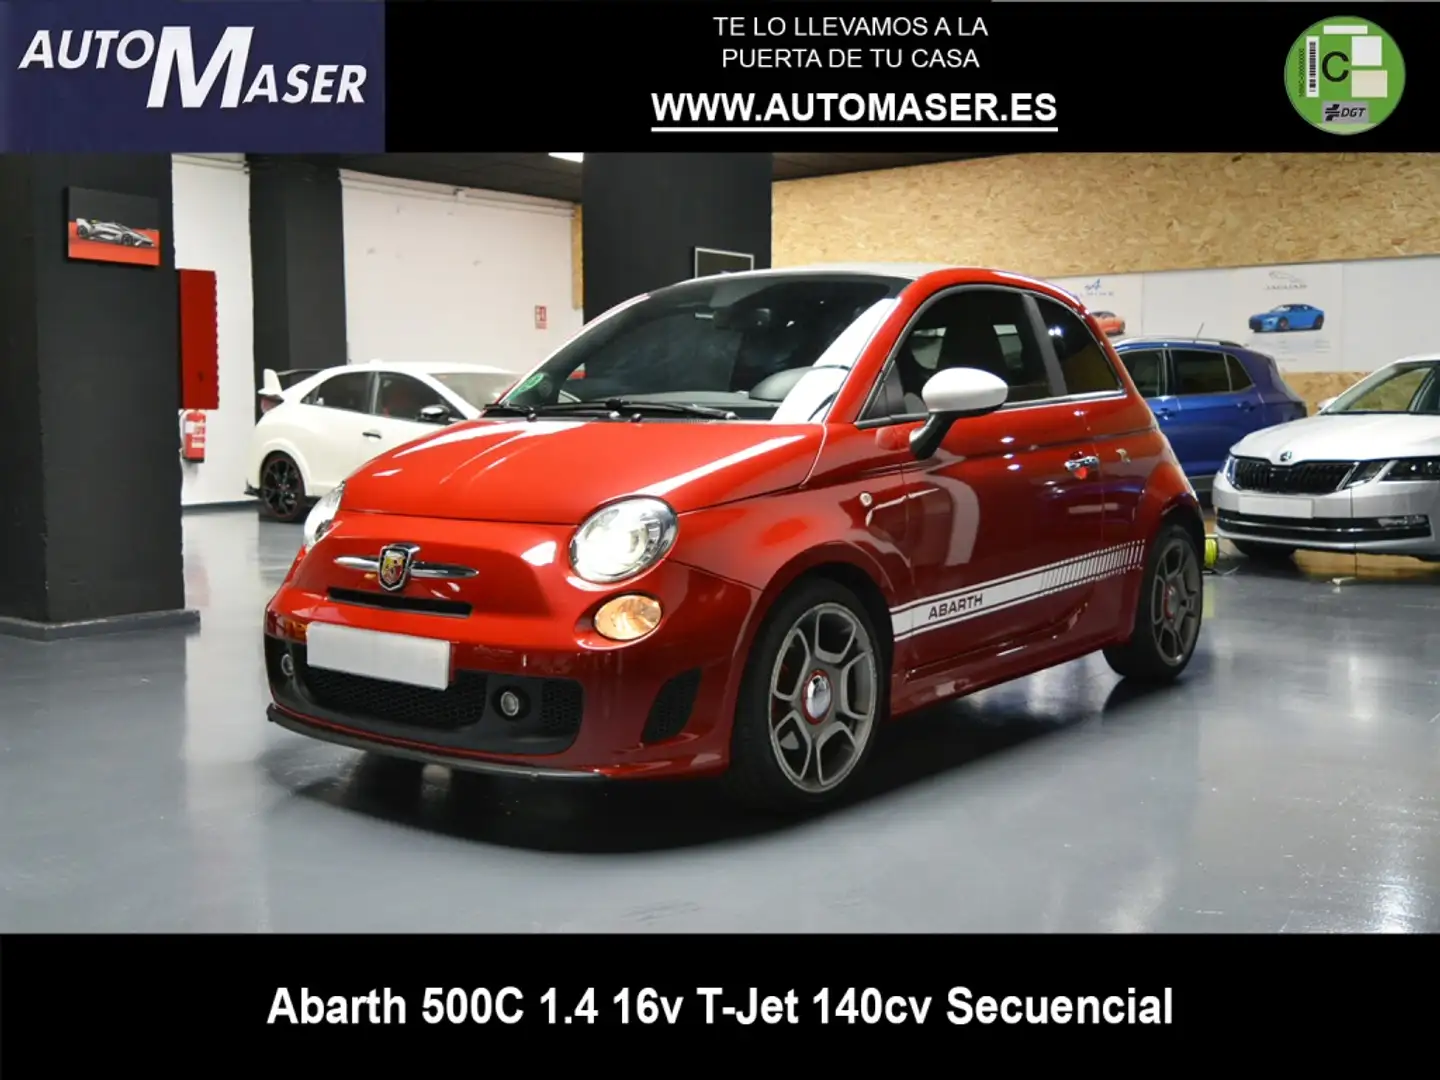 Abarth 500 500C 1.4T JET SECUENCIAL 140 Rot - 1